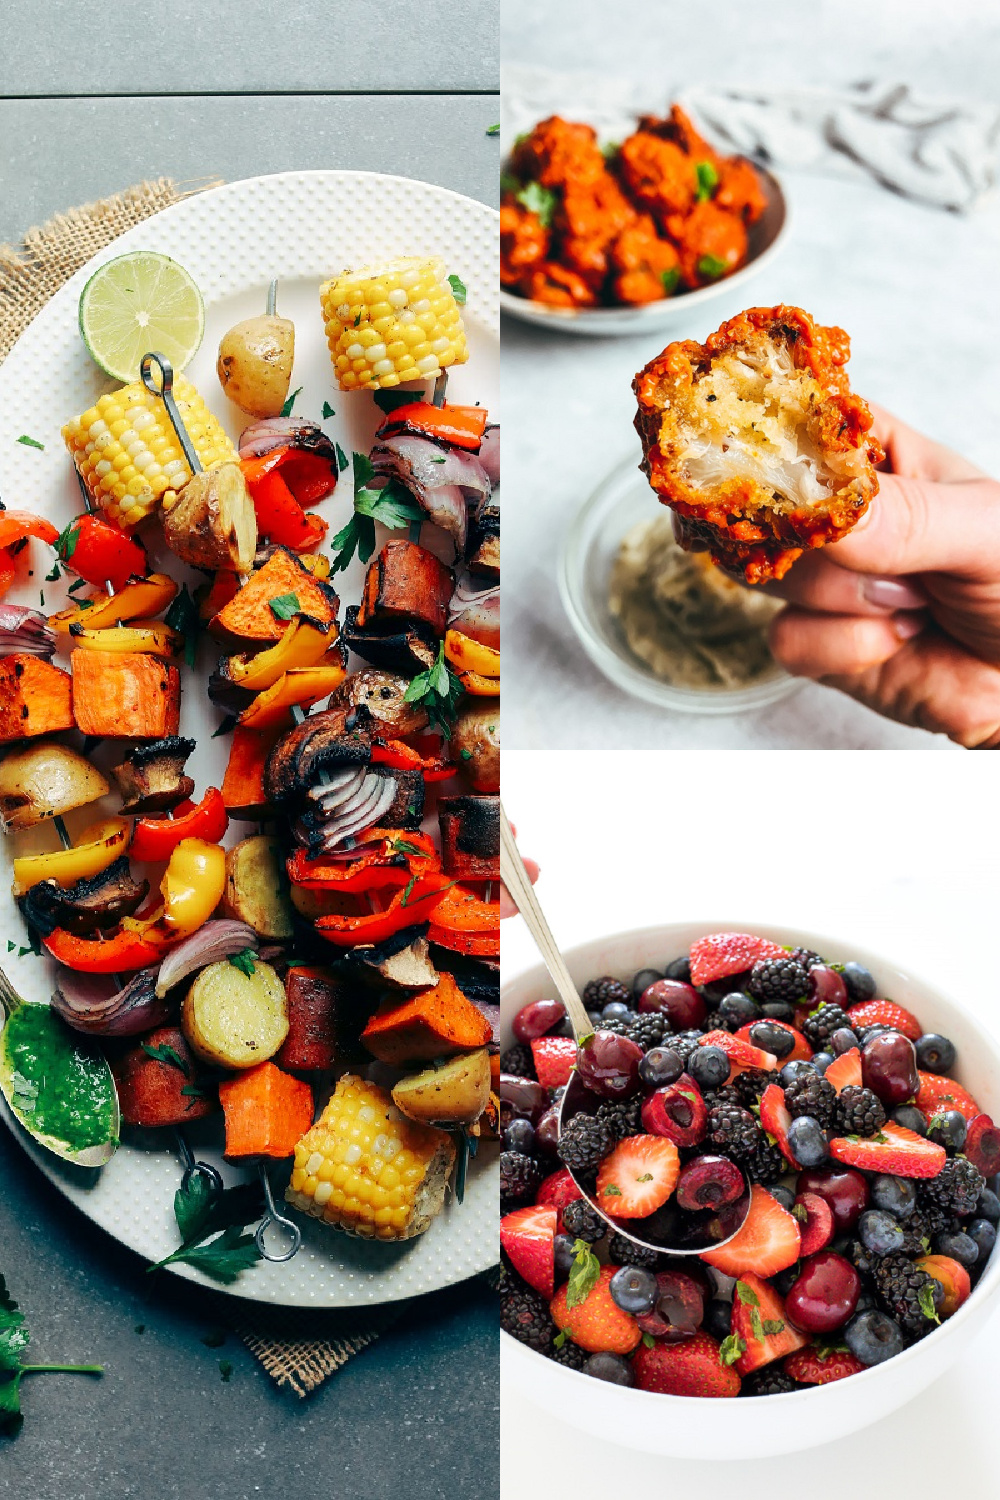 Easy and Delicious Vegan Cookout Recipes for Summer